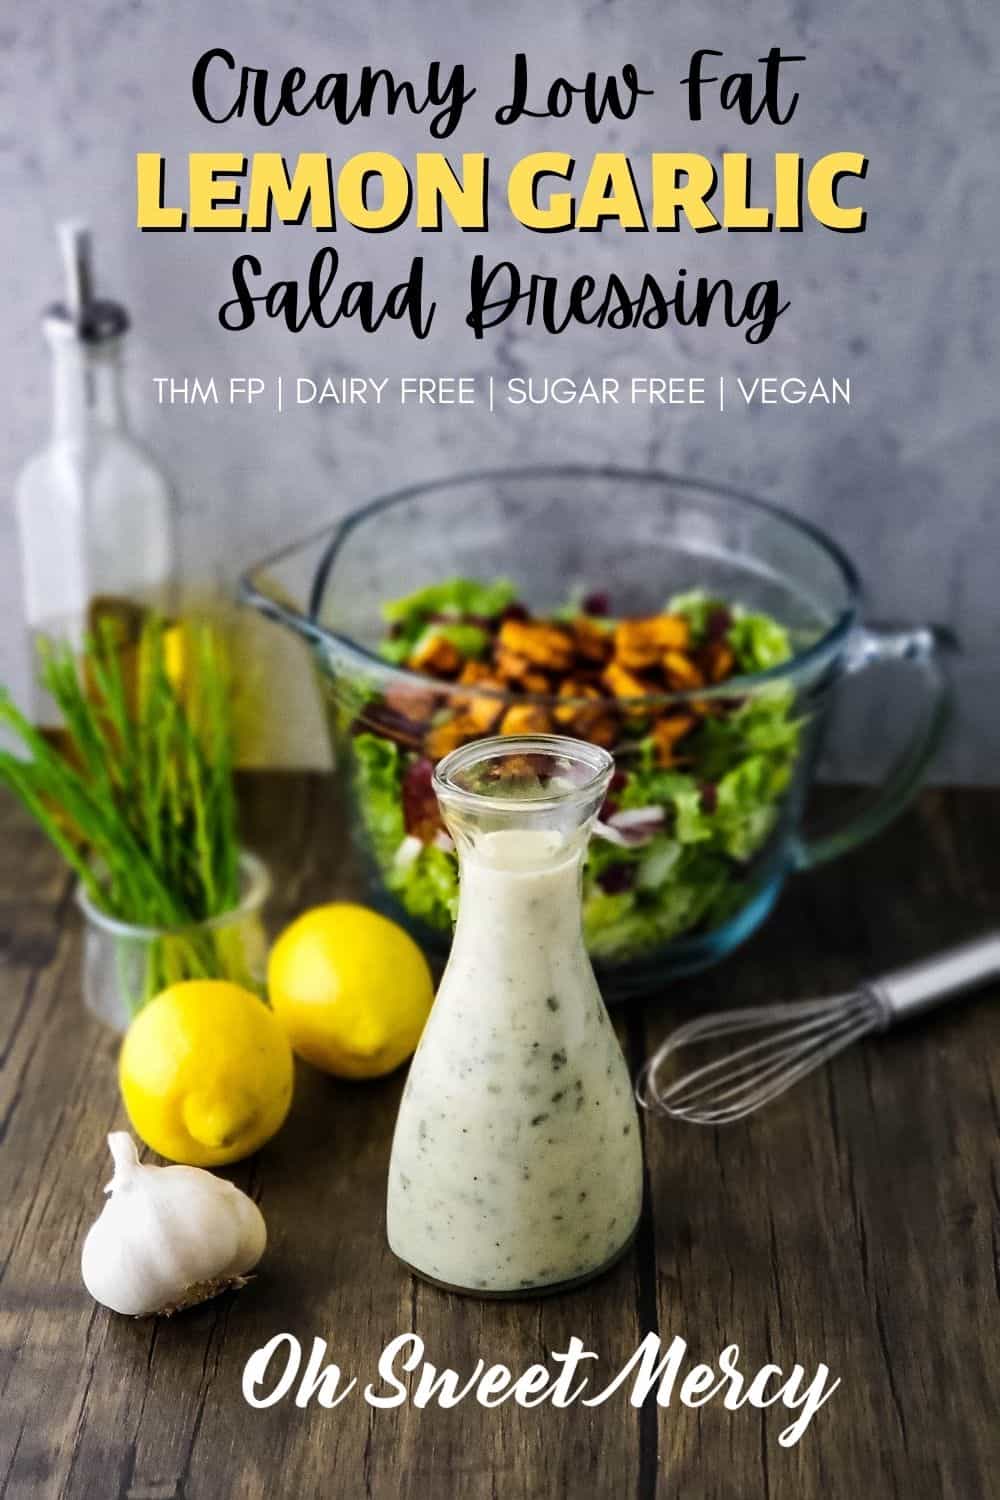 Creamy, lemony, garlicky, and bursting with fresh flavor, this low fat Creamy Lemon Garlic Salad Dressing is just what you need to perk up your salads and wraps without tons of added fat and absolutely zero added sugars. It's also dairy free and vegan!  Perfect for all your Trim Healthy Mama meals and snacks, it works with any fuel type. #lowfat #lowcarb #sugarfree #dairyfree #glutenfree #eggfree #vegan #trimhealthymama #thm #saladdressing #salad @ohsweetmercy